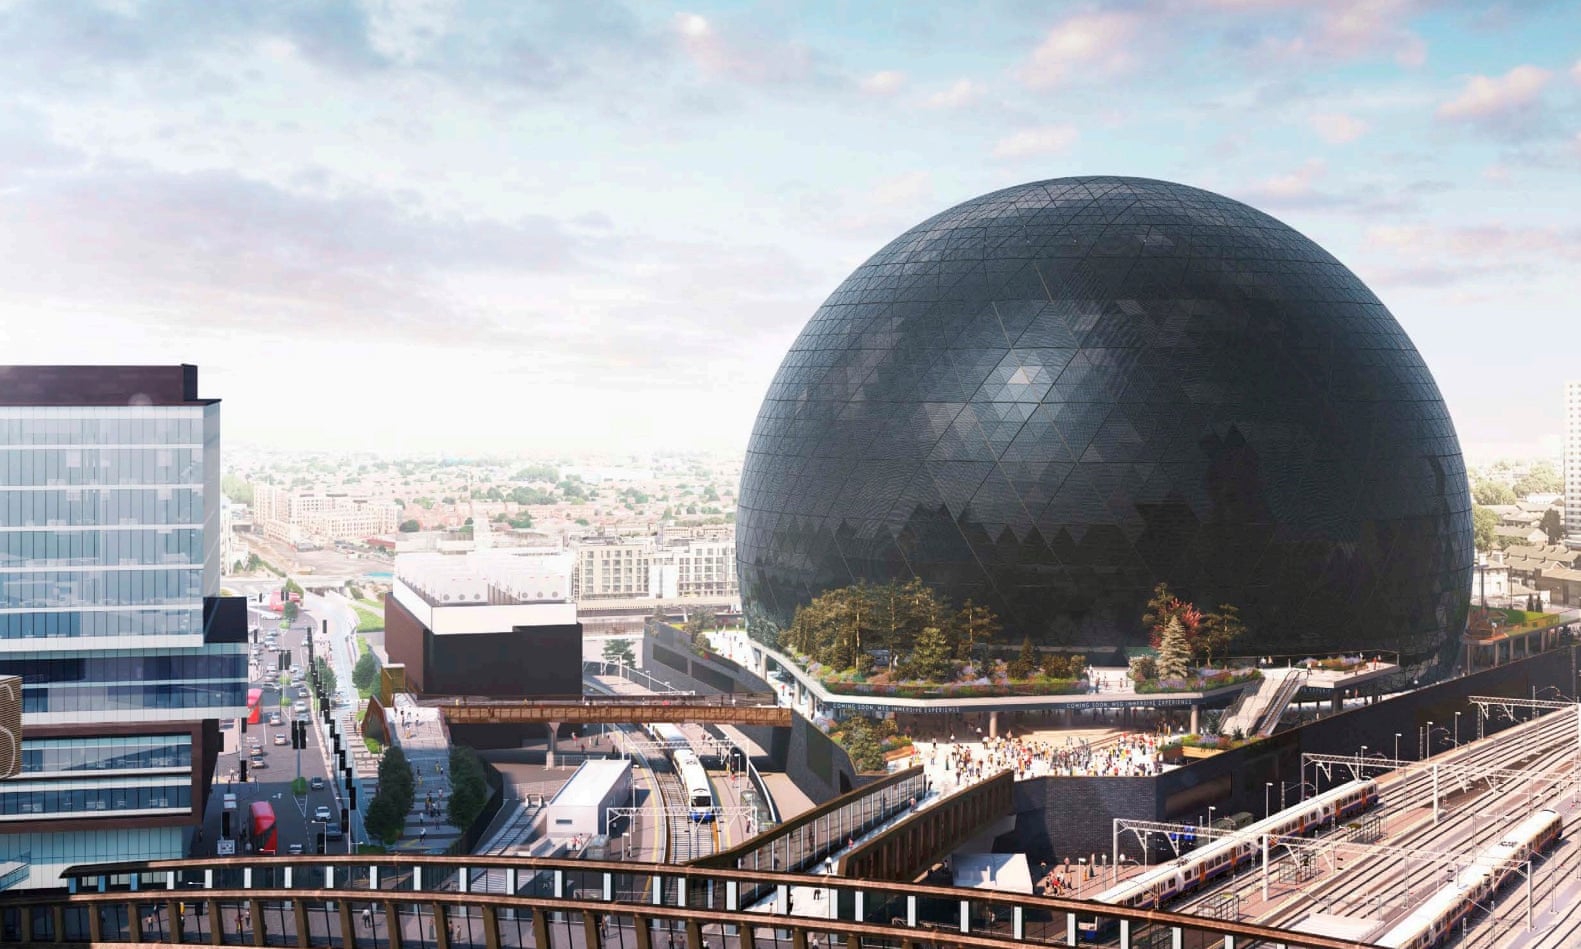 The U K S Largest Concert Venue Will Feature 360 Degree Sound